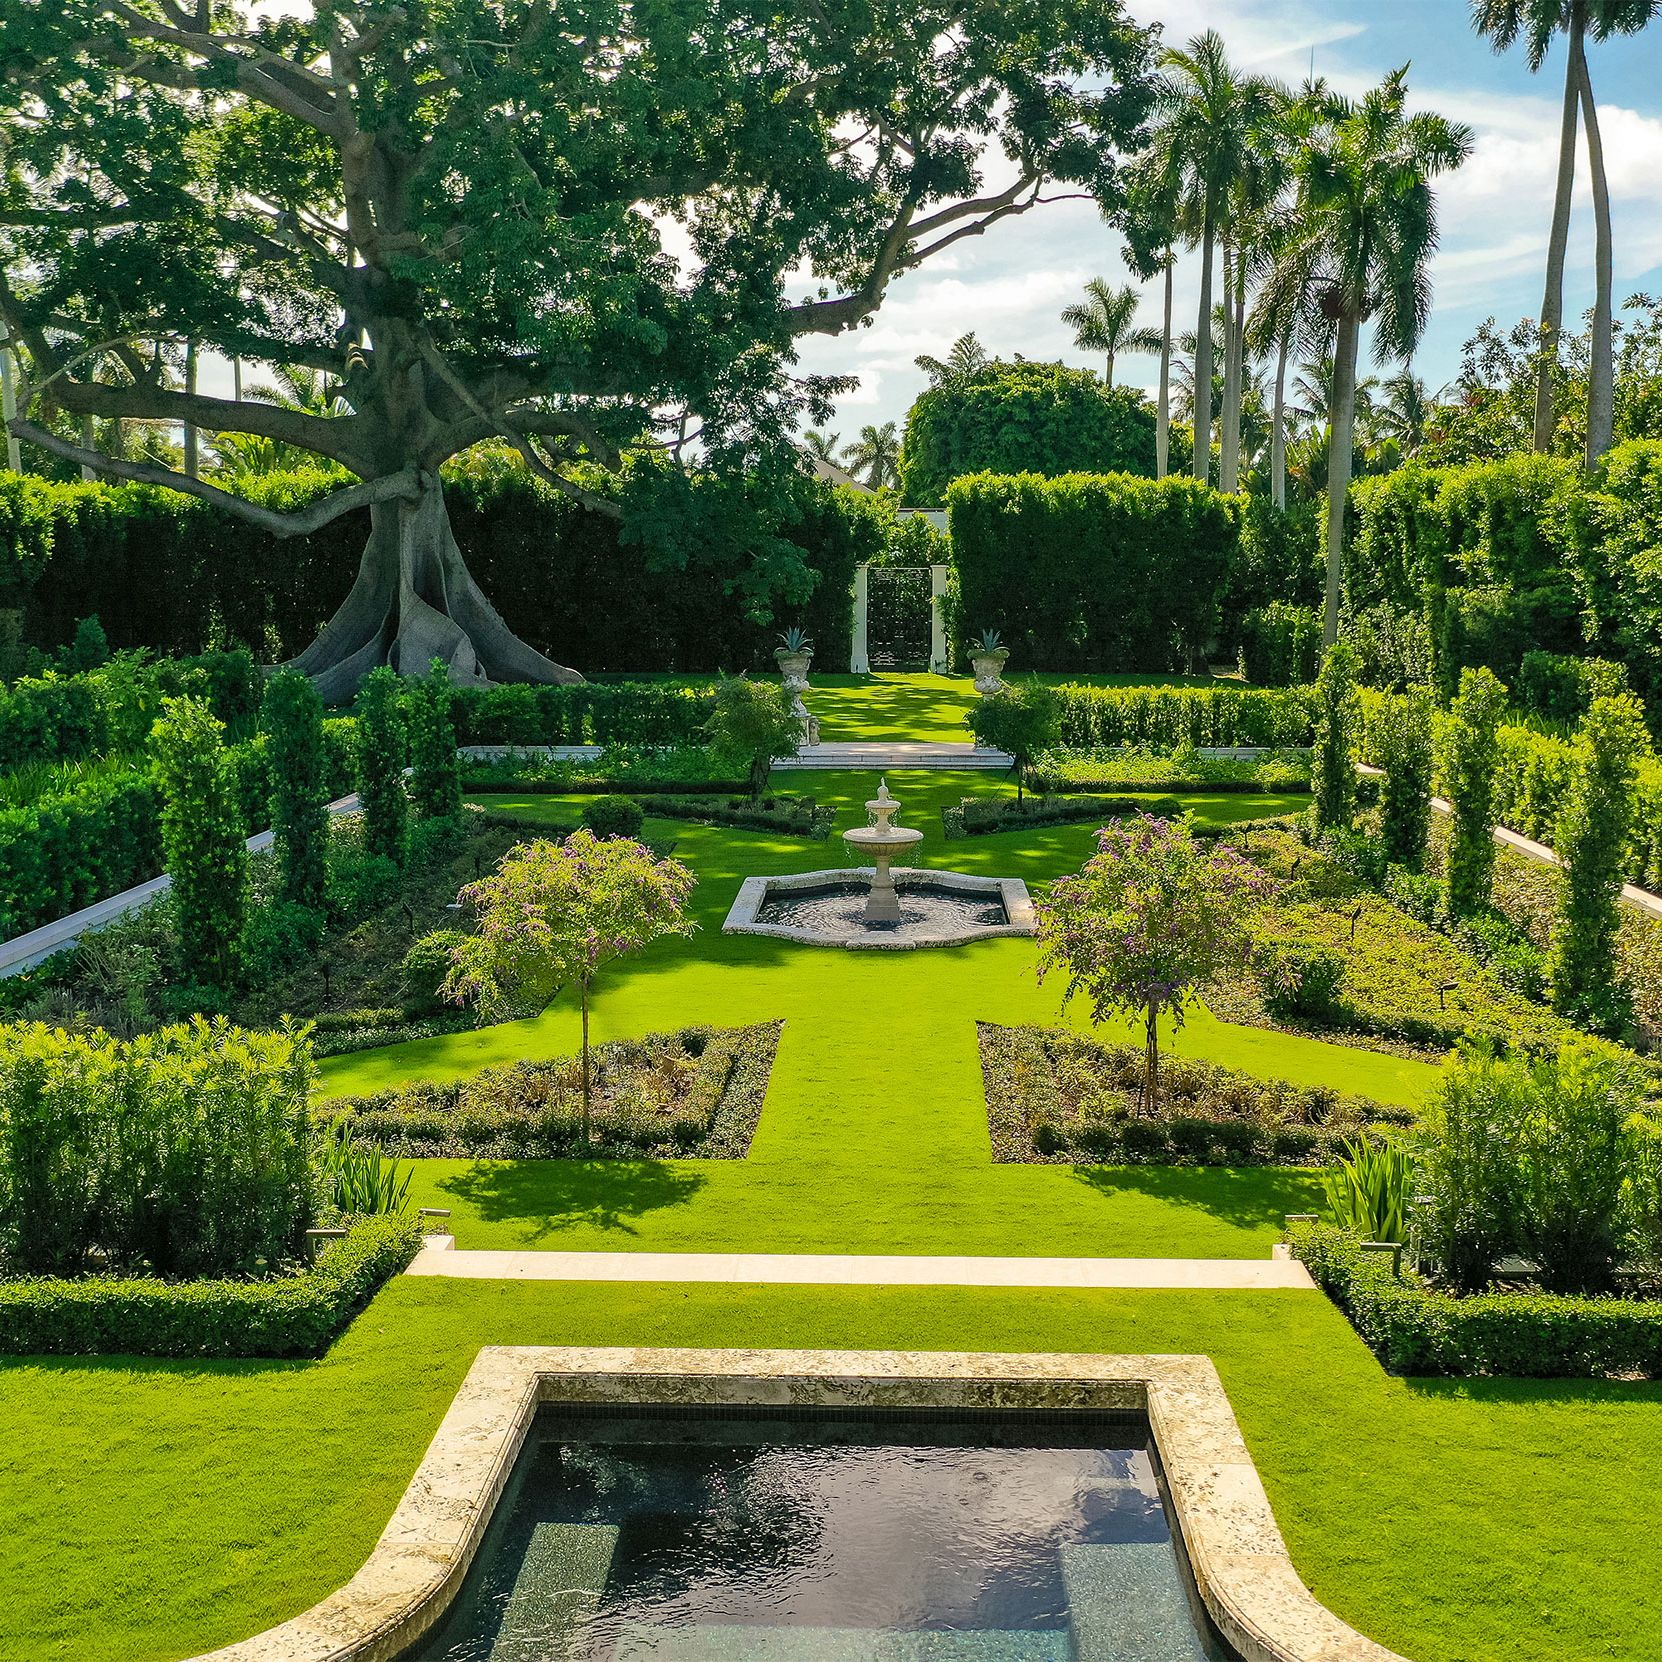 The Dos and Don'ts of Gardening, According to Two Landscape Stars